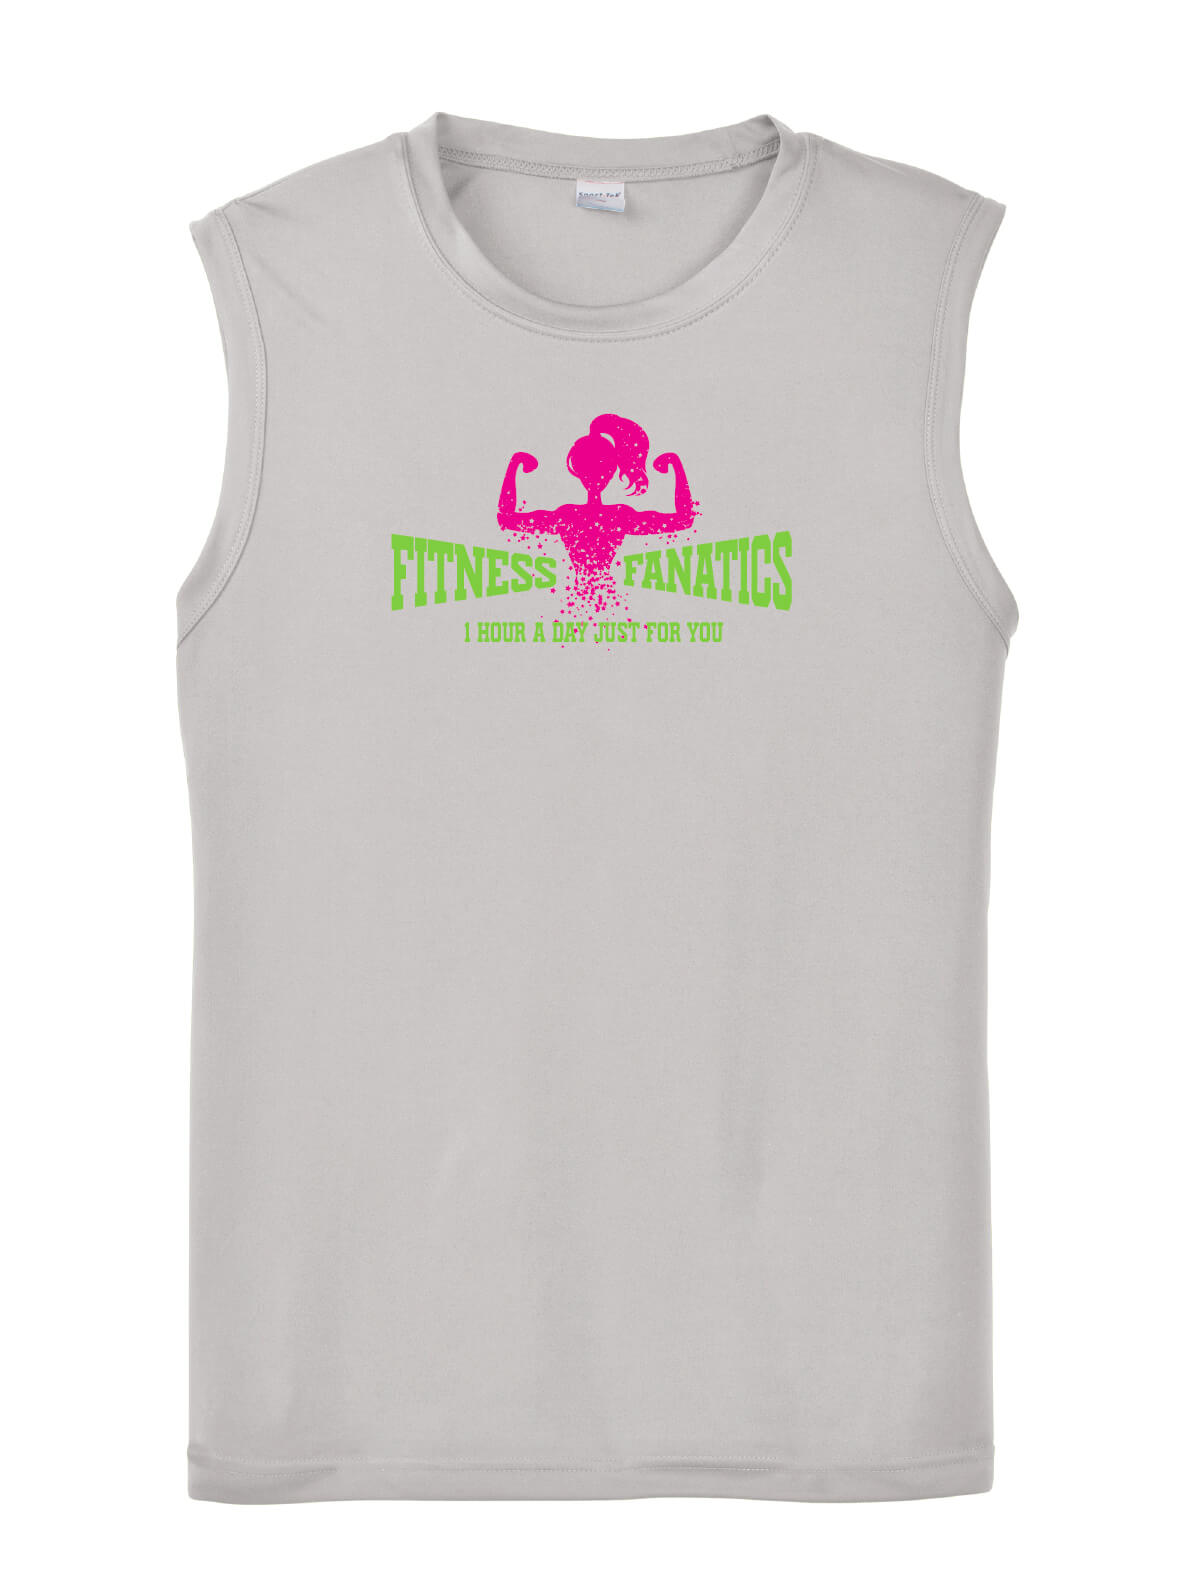 Mens Competitor Tank gray with pink